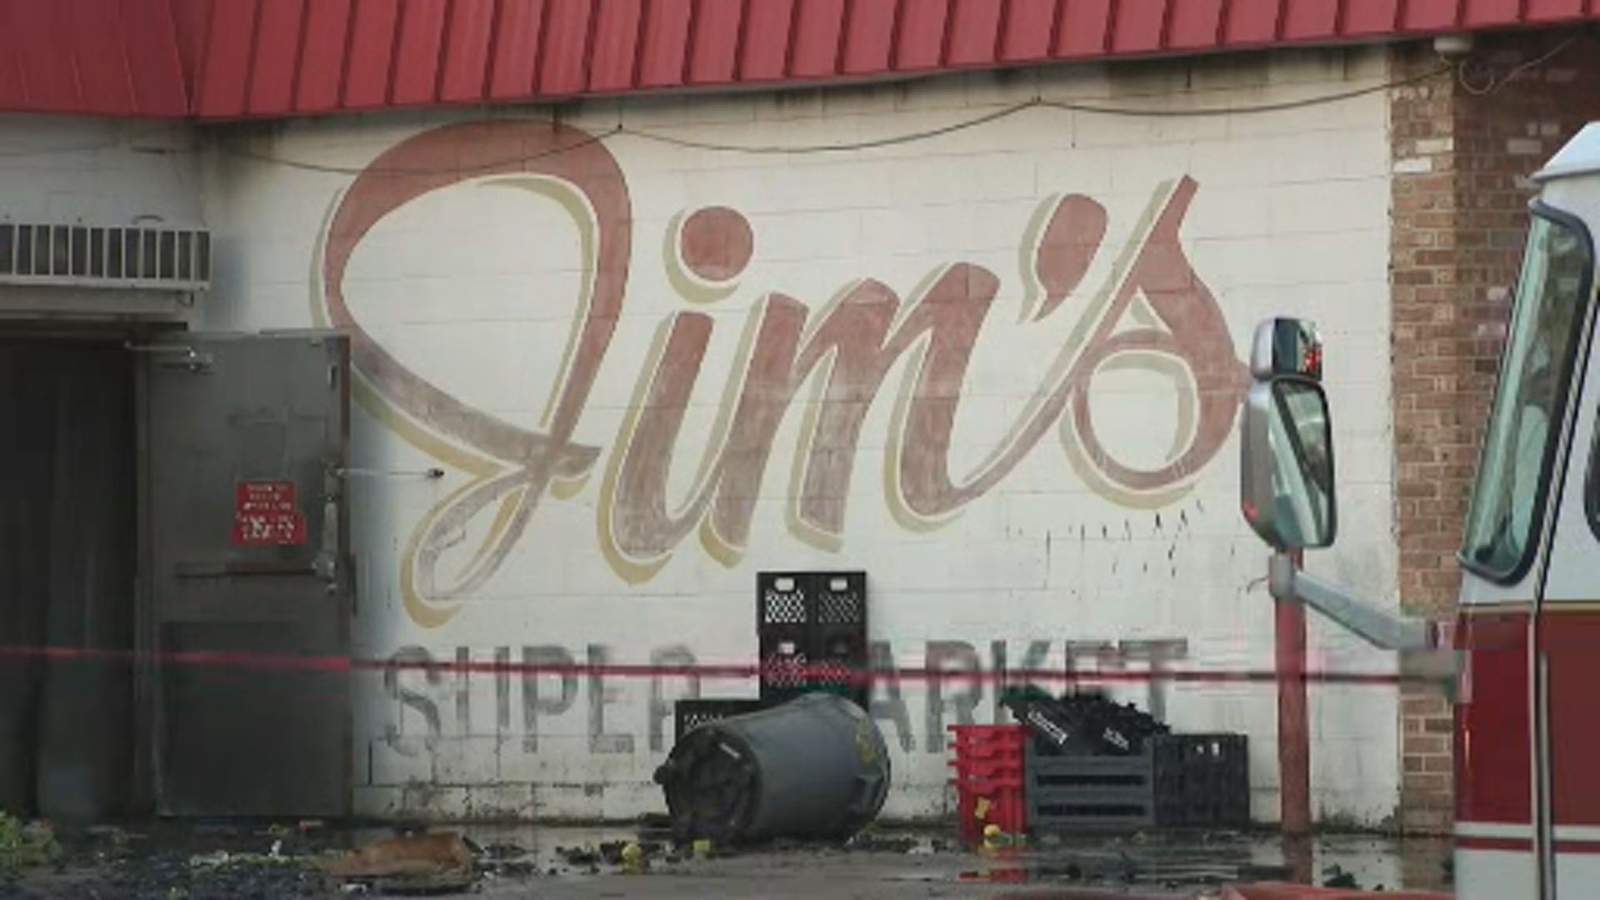 Food giveaway organized after Jim’s Supermarket burns down